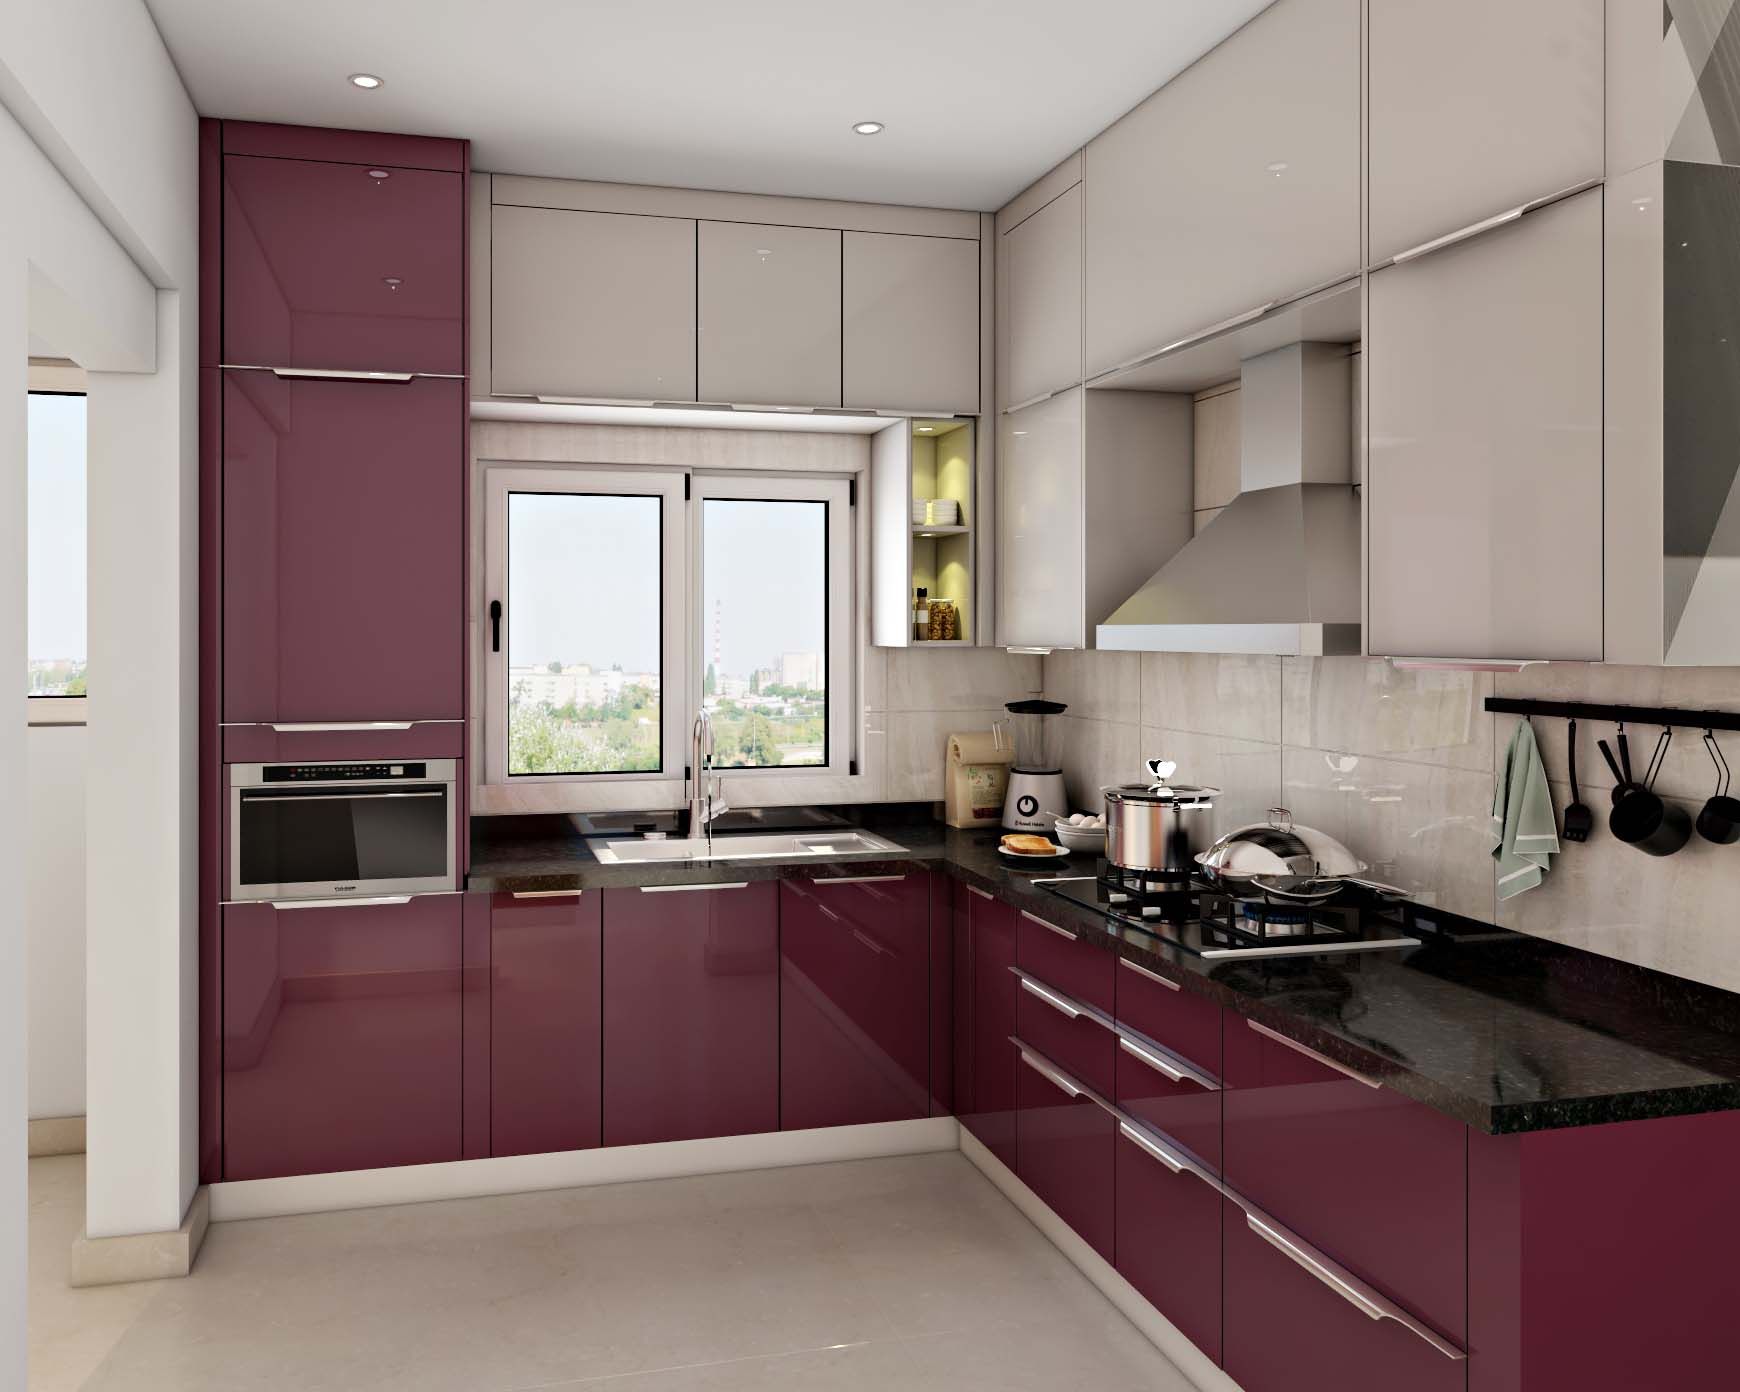 Contemporary L-Shaped Modular Kitchen Design With Beige Wall Unit